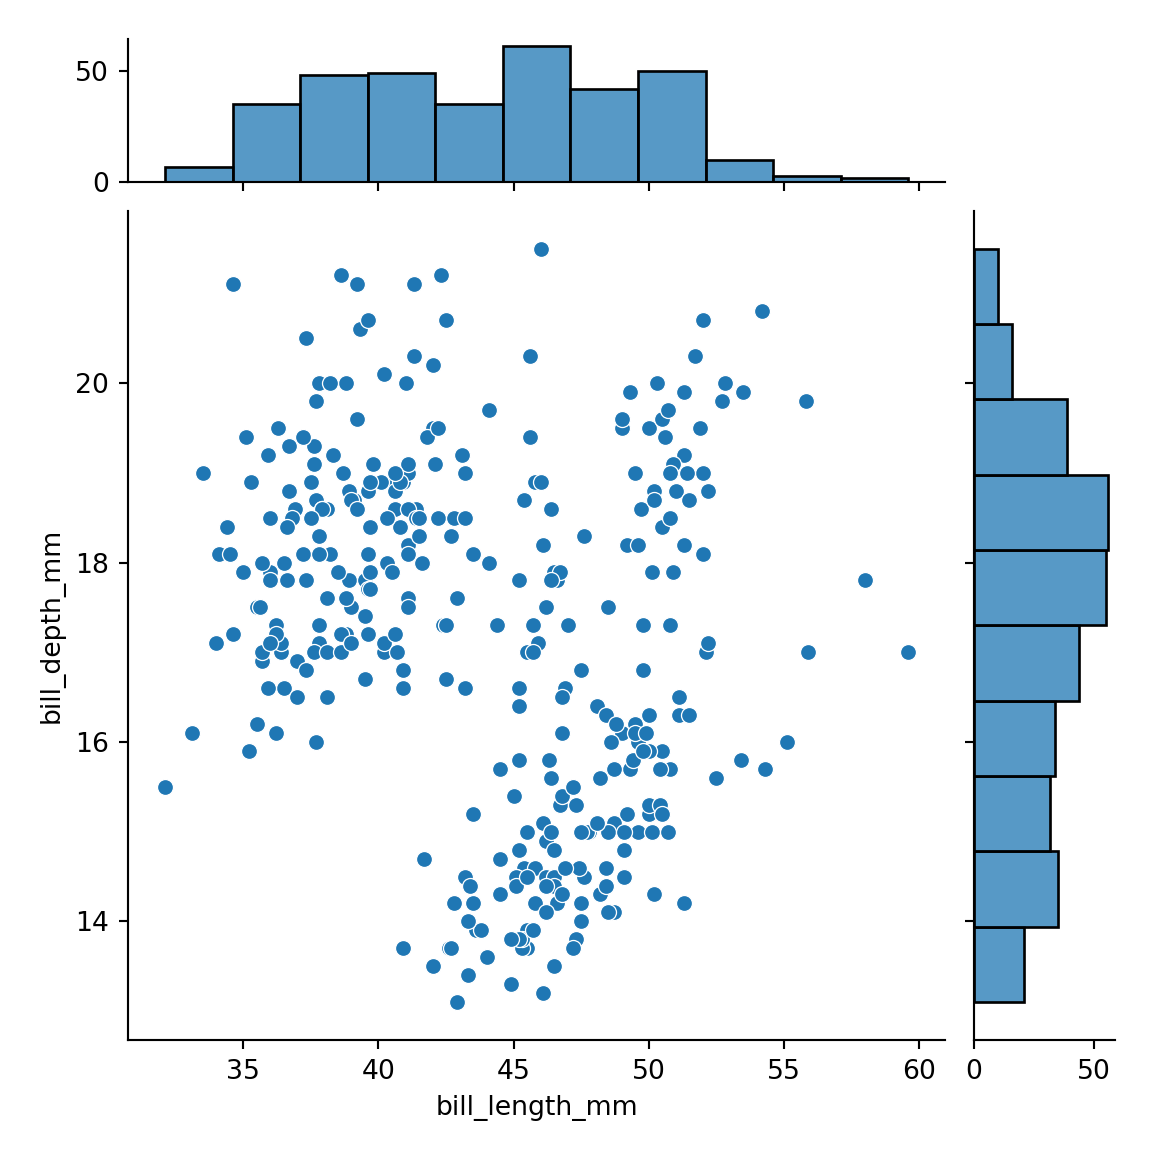 Adding the axes to the marginal plots in seaborn